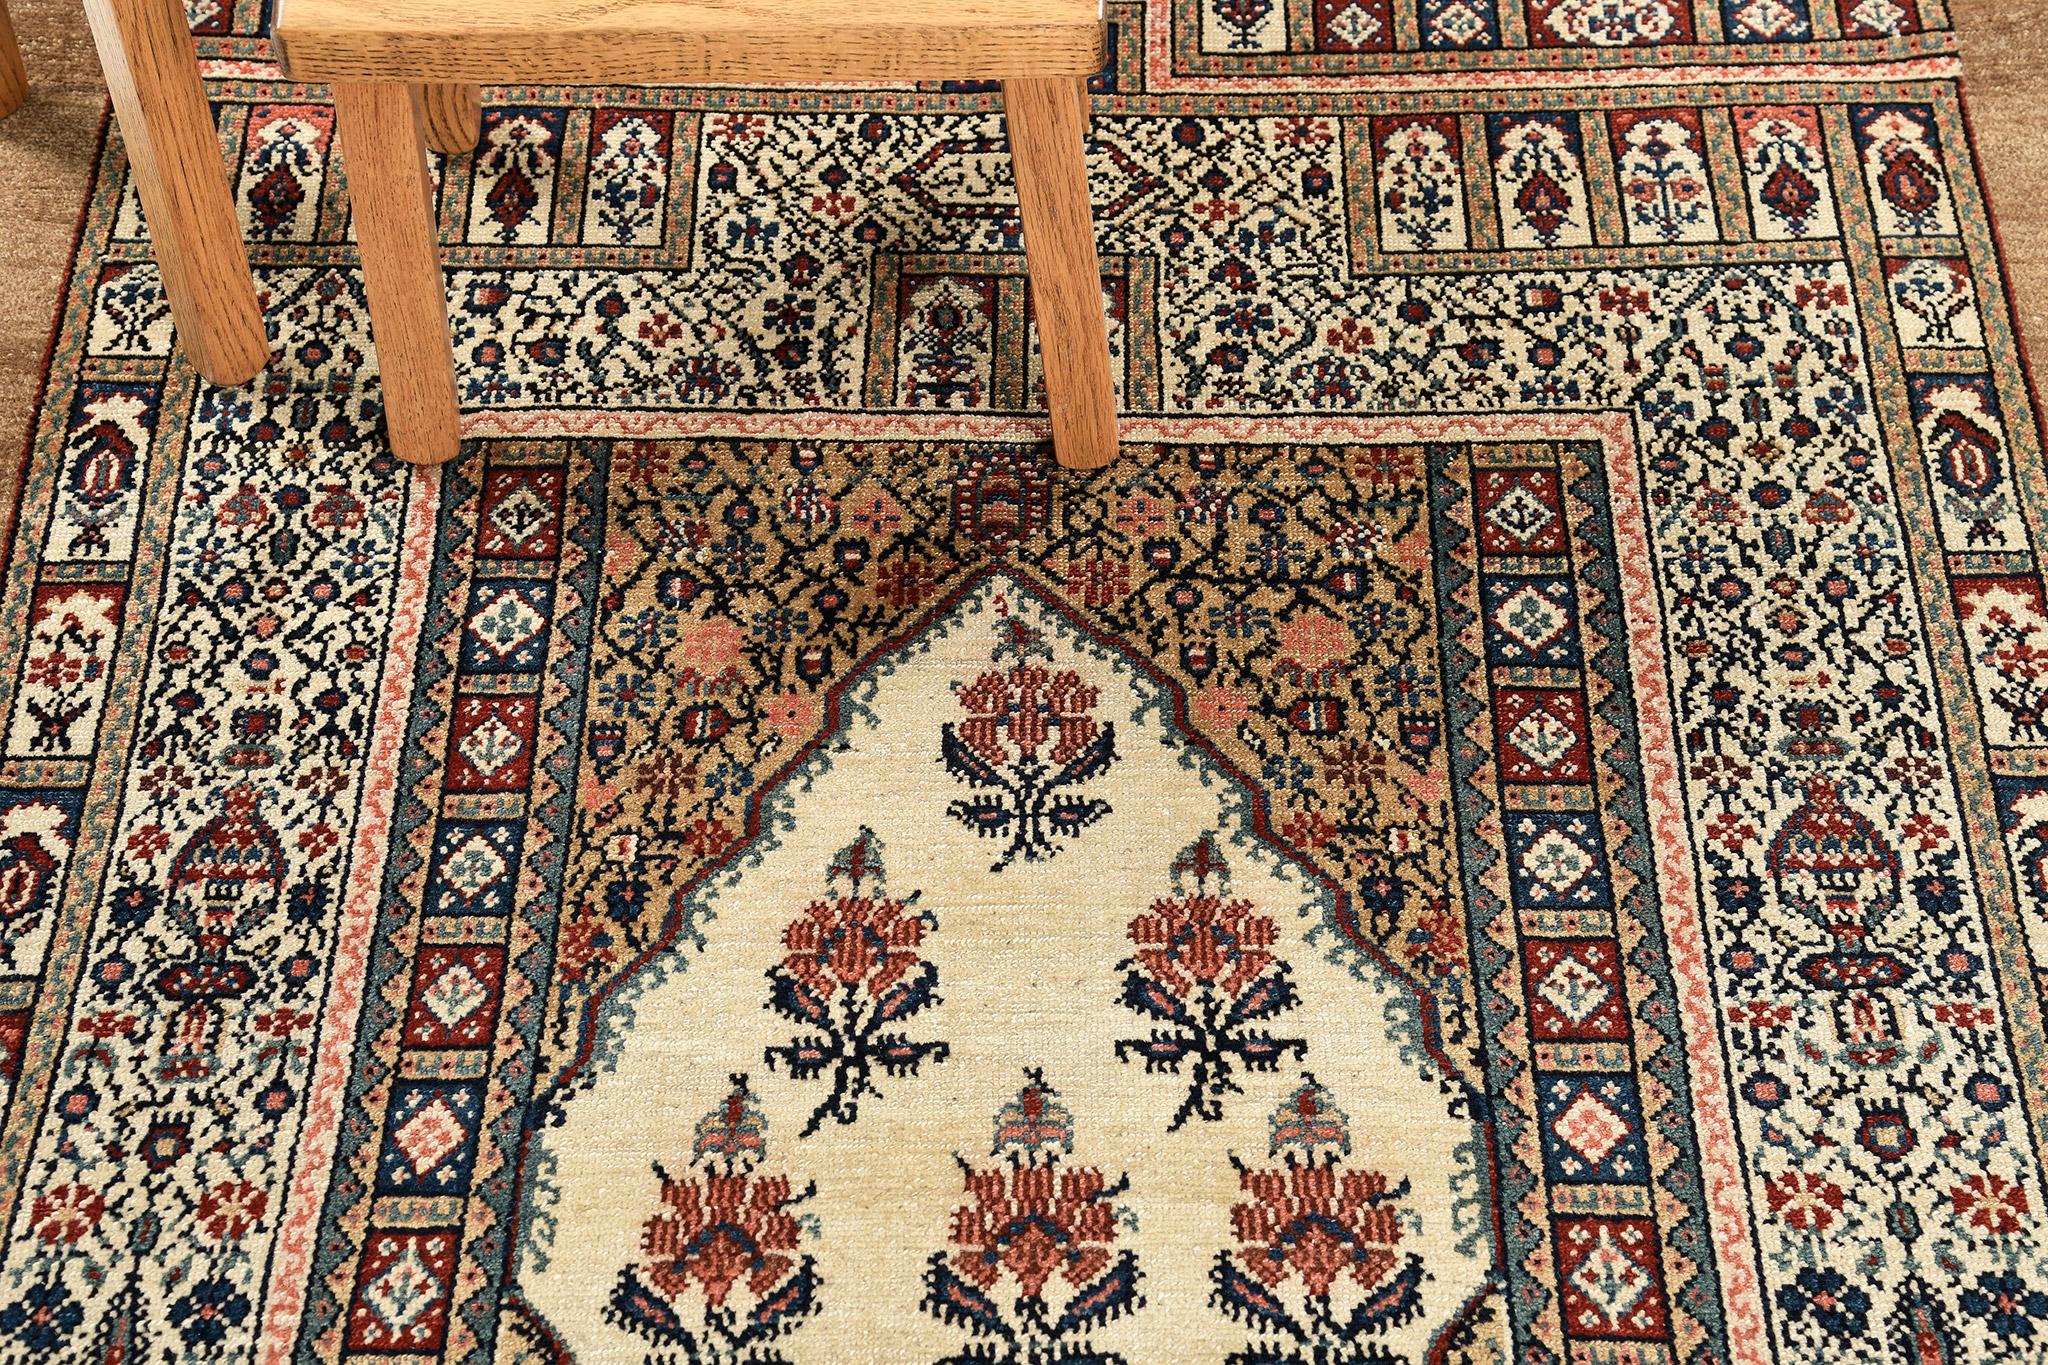 Over a century old, this antique Persian Sarab Rug is from circa 1880. As the broad selection of pieces with high artistic merit and condition decreases, owning this particular piece will not only increase the aesthetics and your investment.